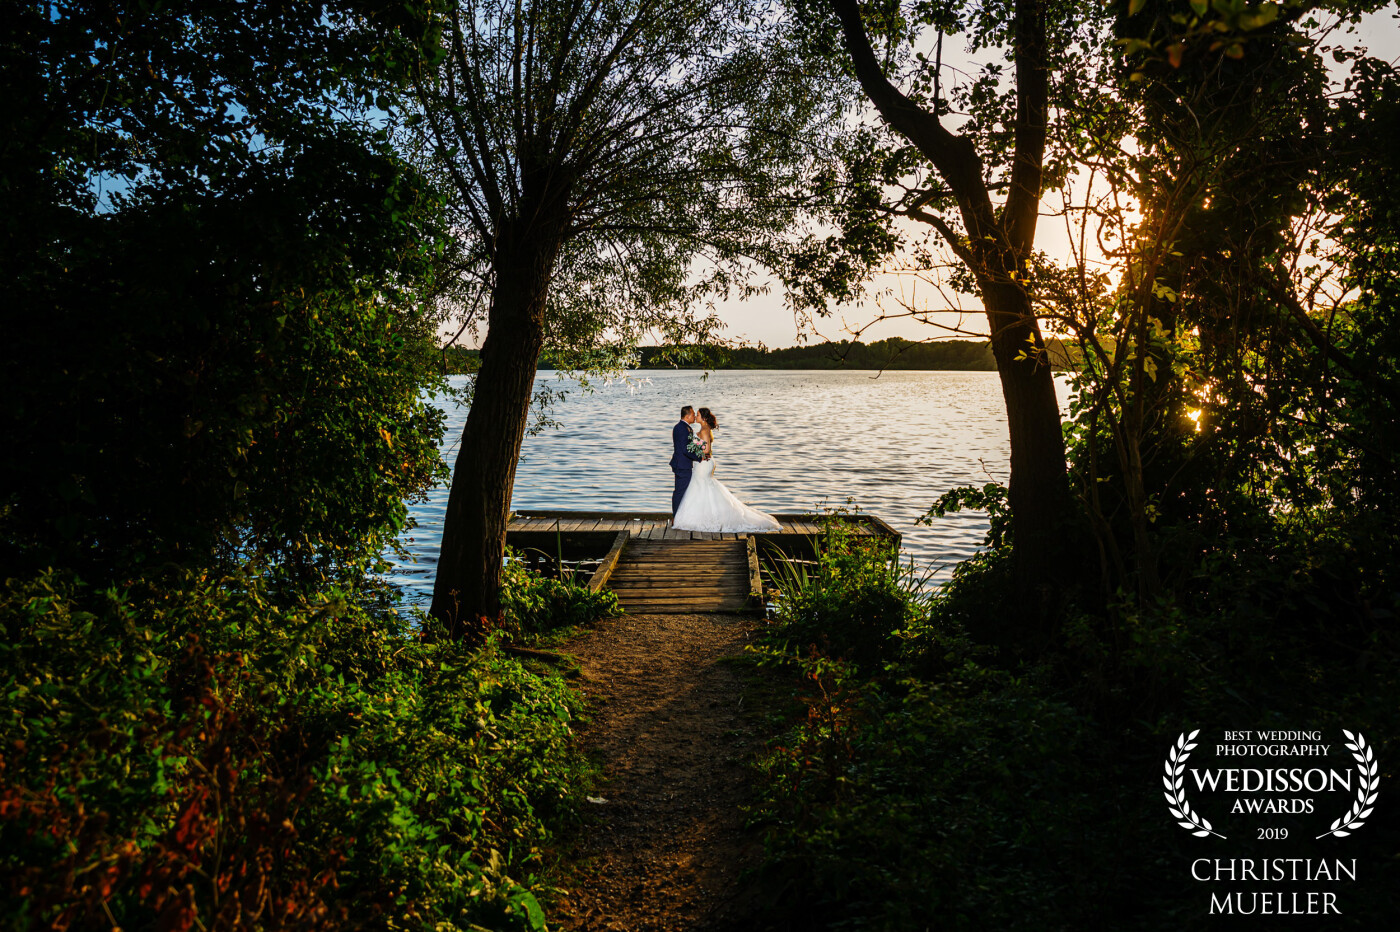 A few years ago I was looking for a location with a footbridge on a lake and had found this one by a Google search. Now I finally had the opportunity to take pictures on this location with this cute Vietnamese couple. With an unleashed flash, I had brightened the couple against the sunset